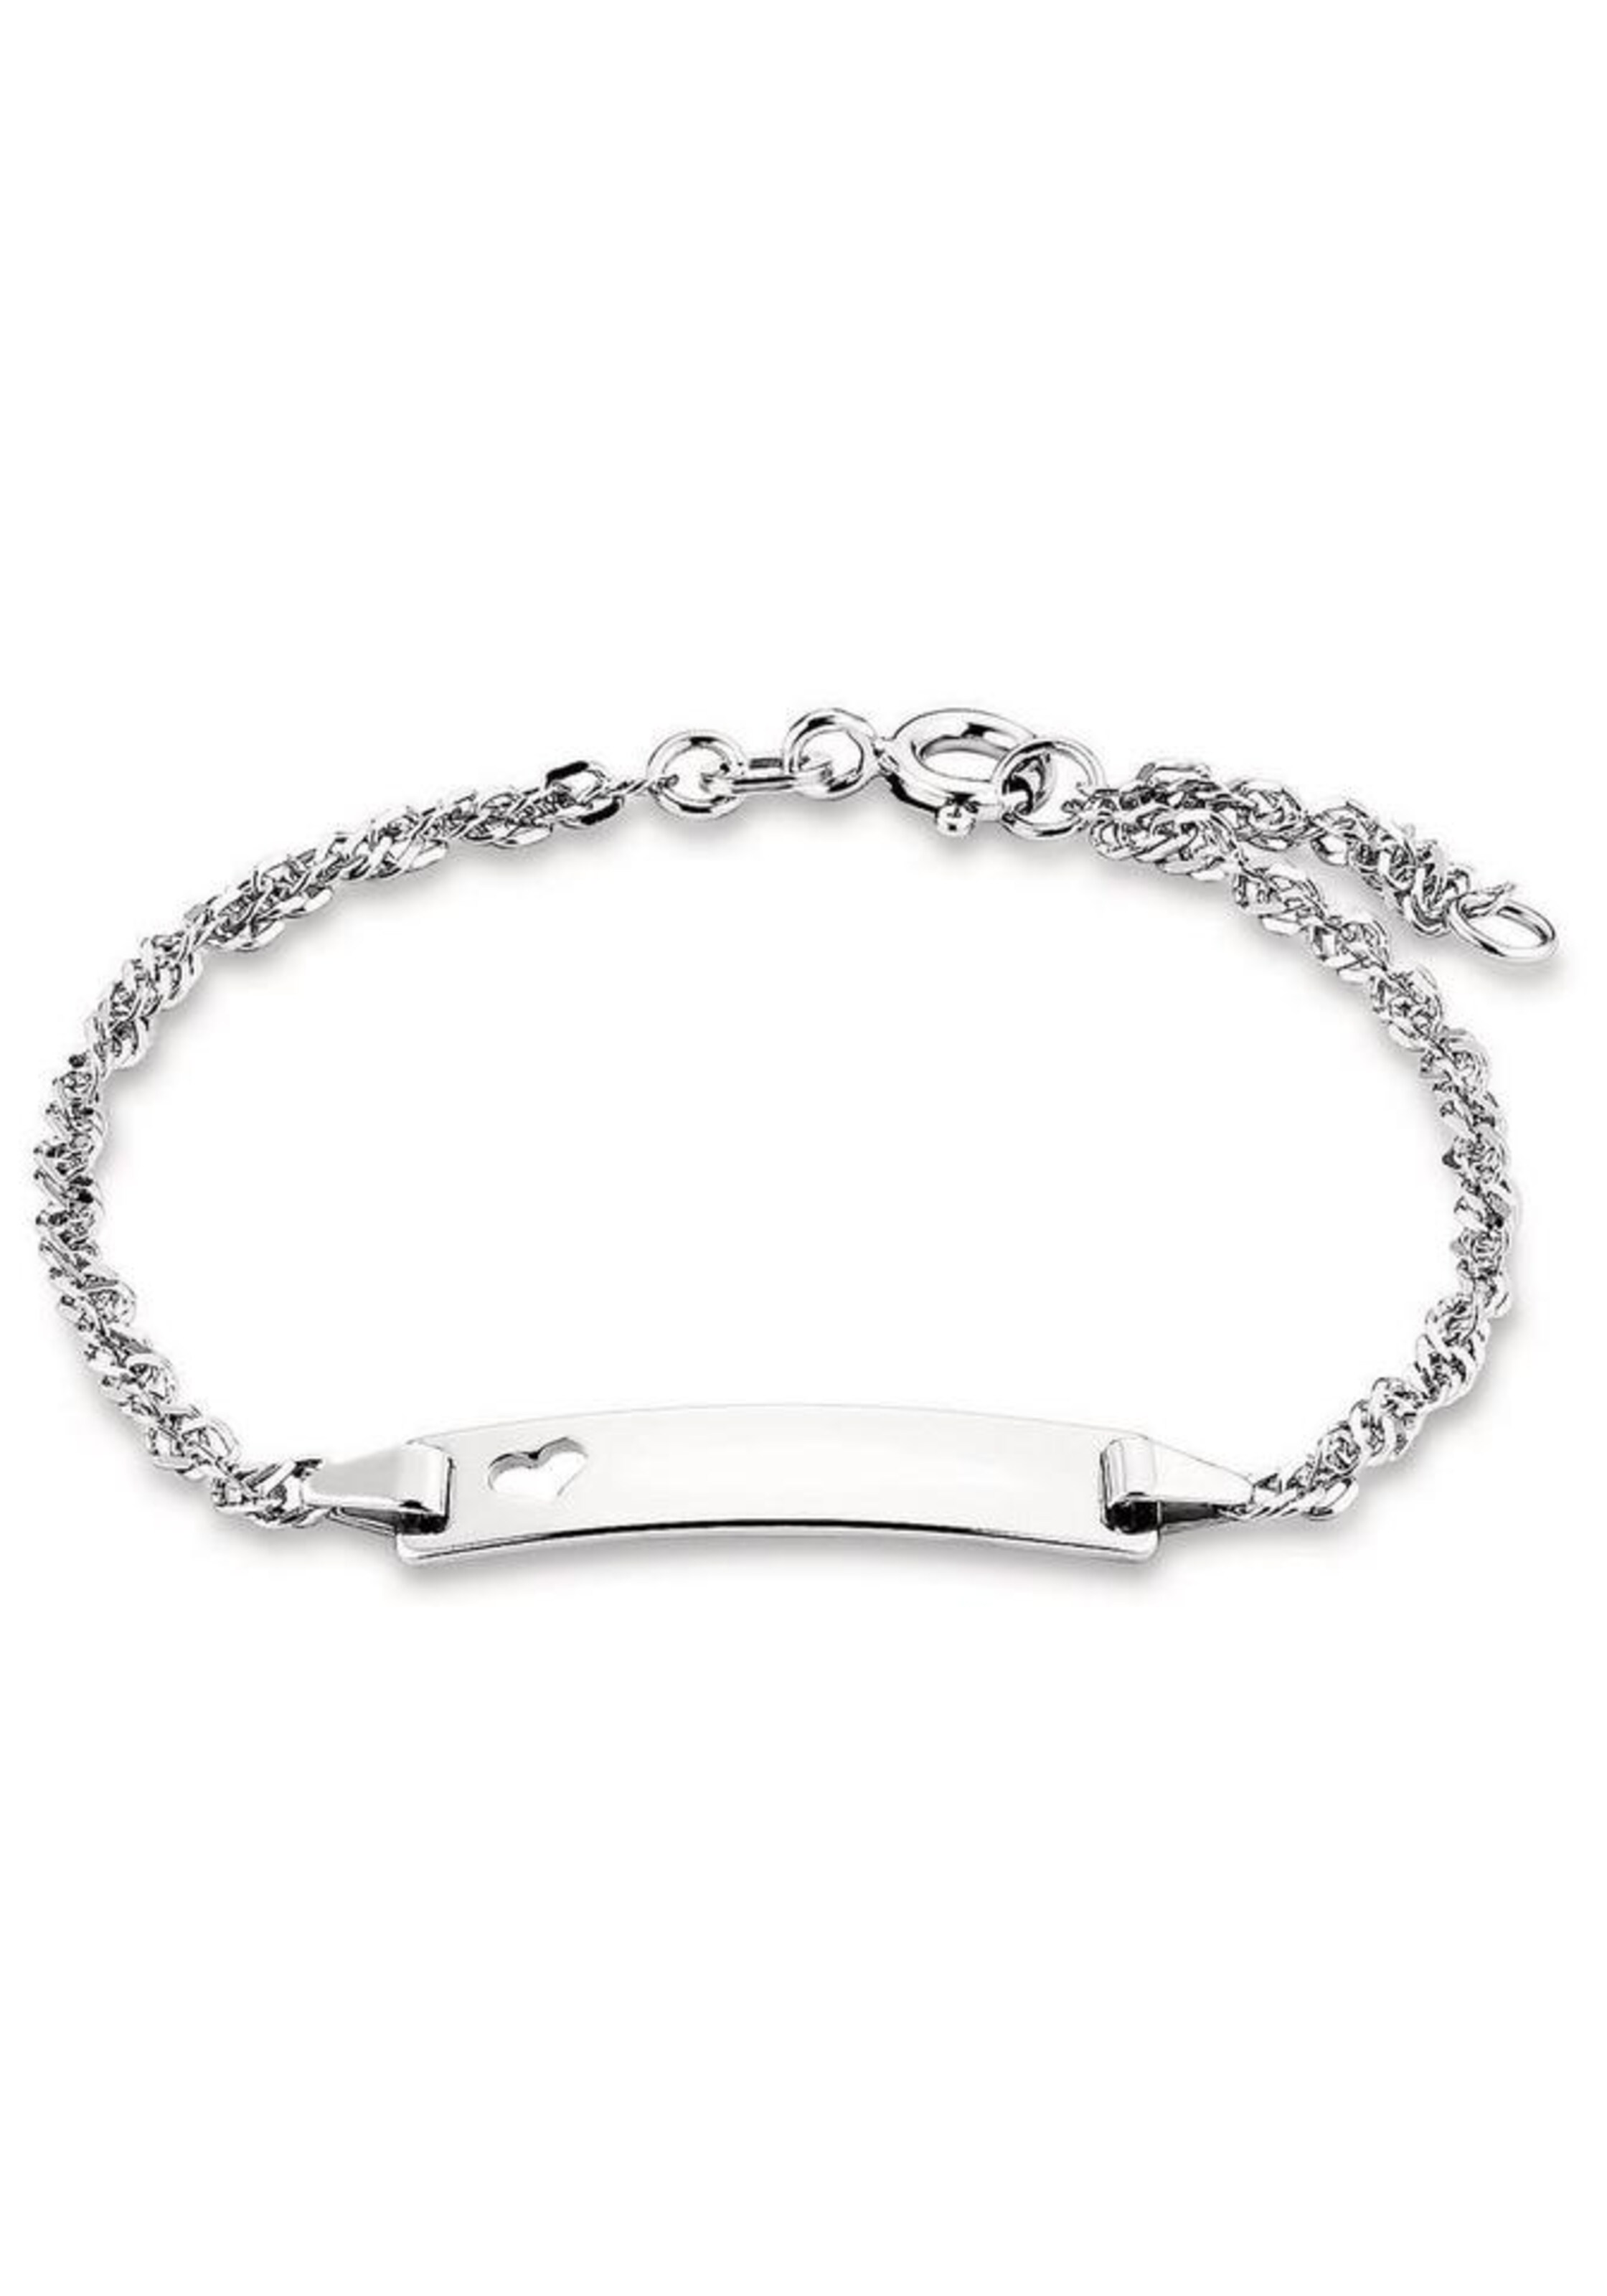 AMOR Armband in Silber 